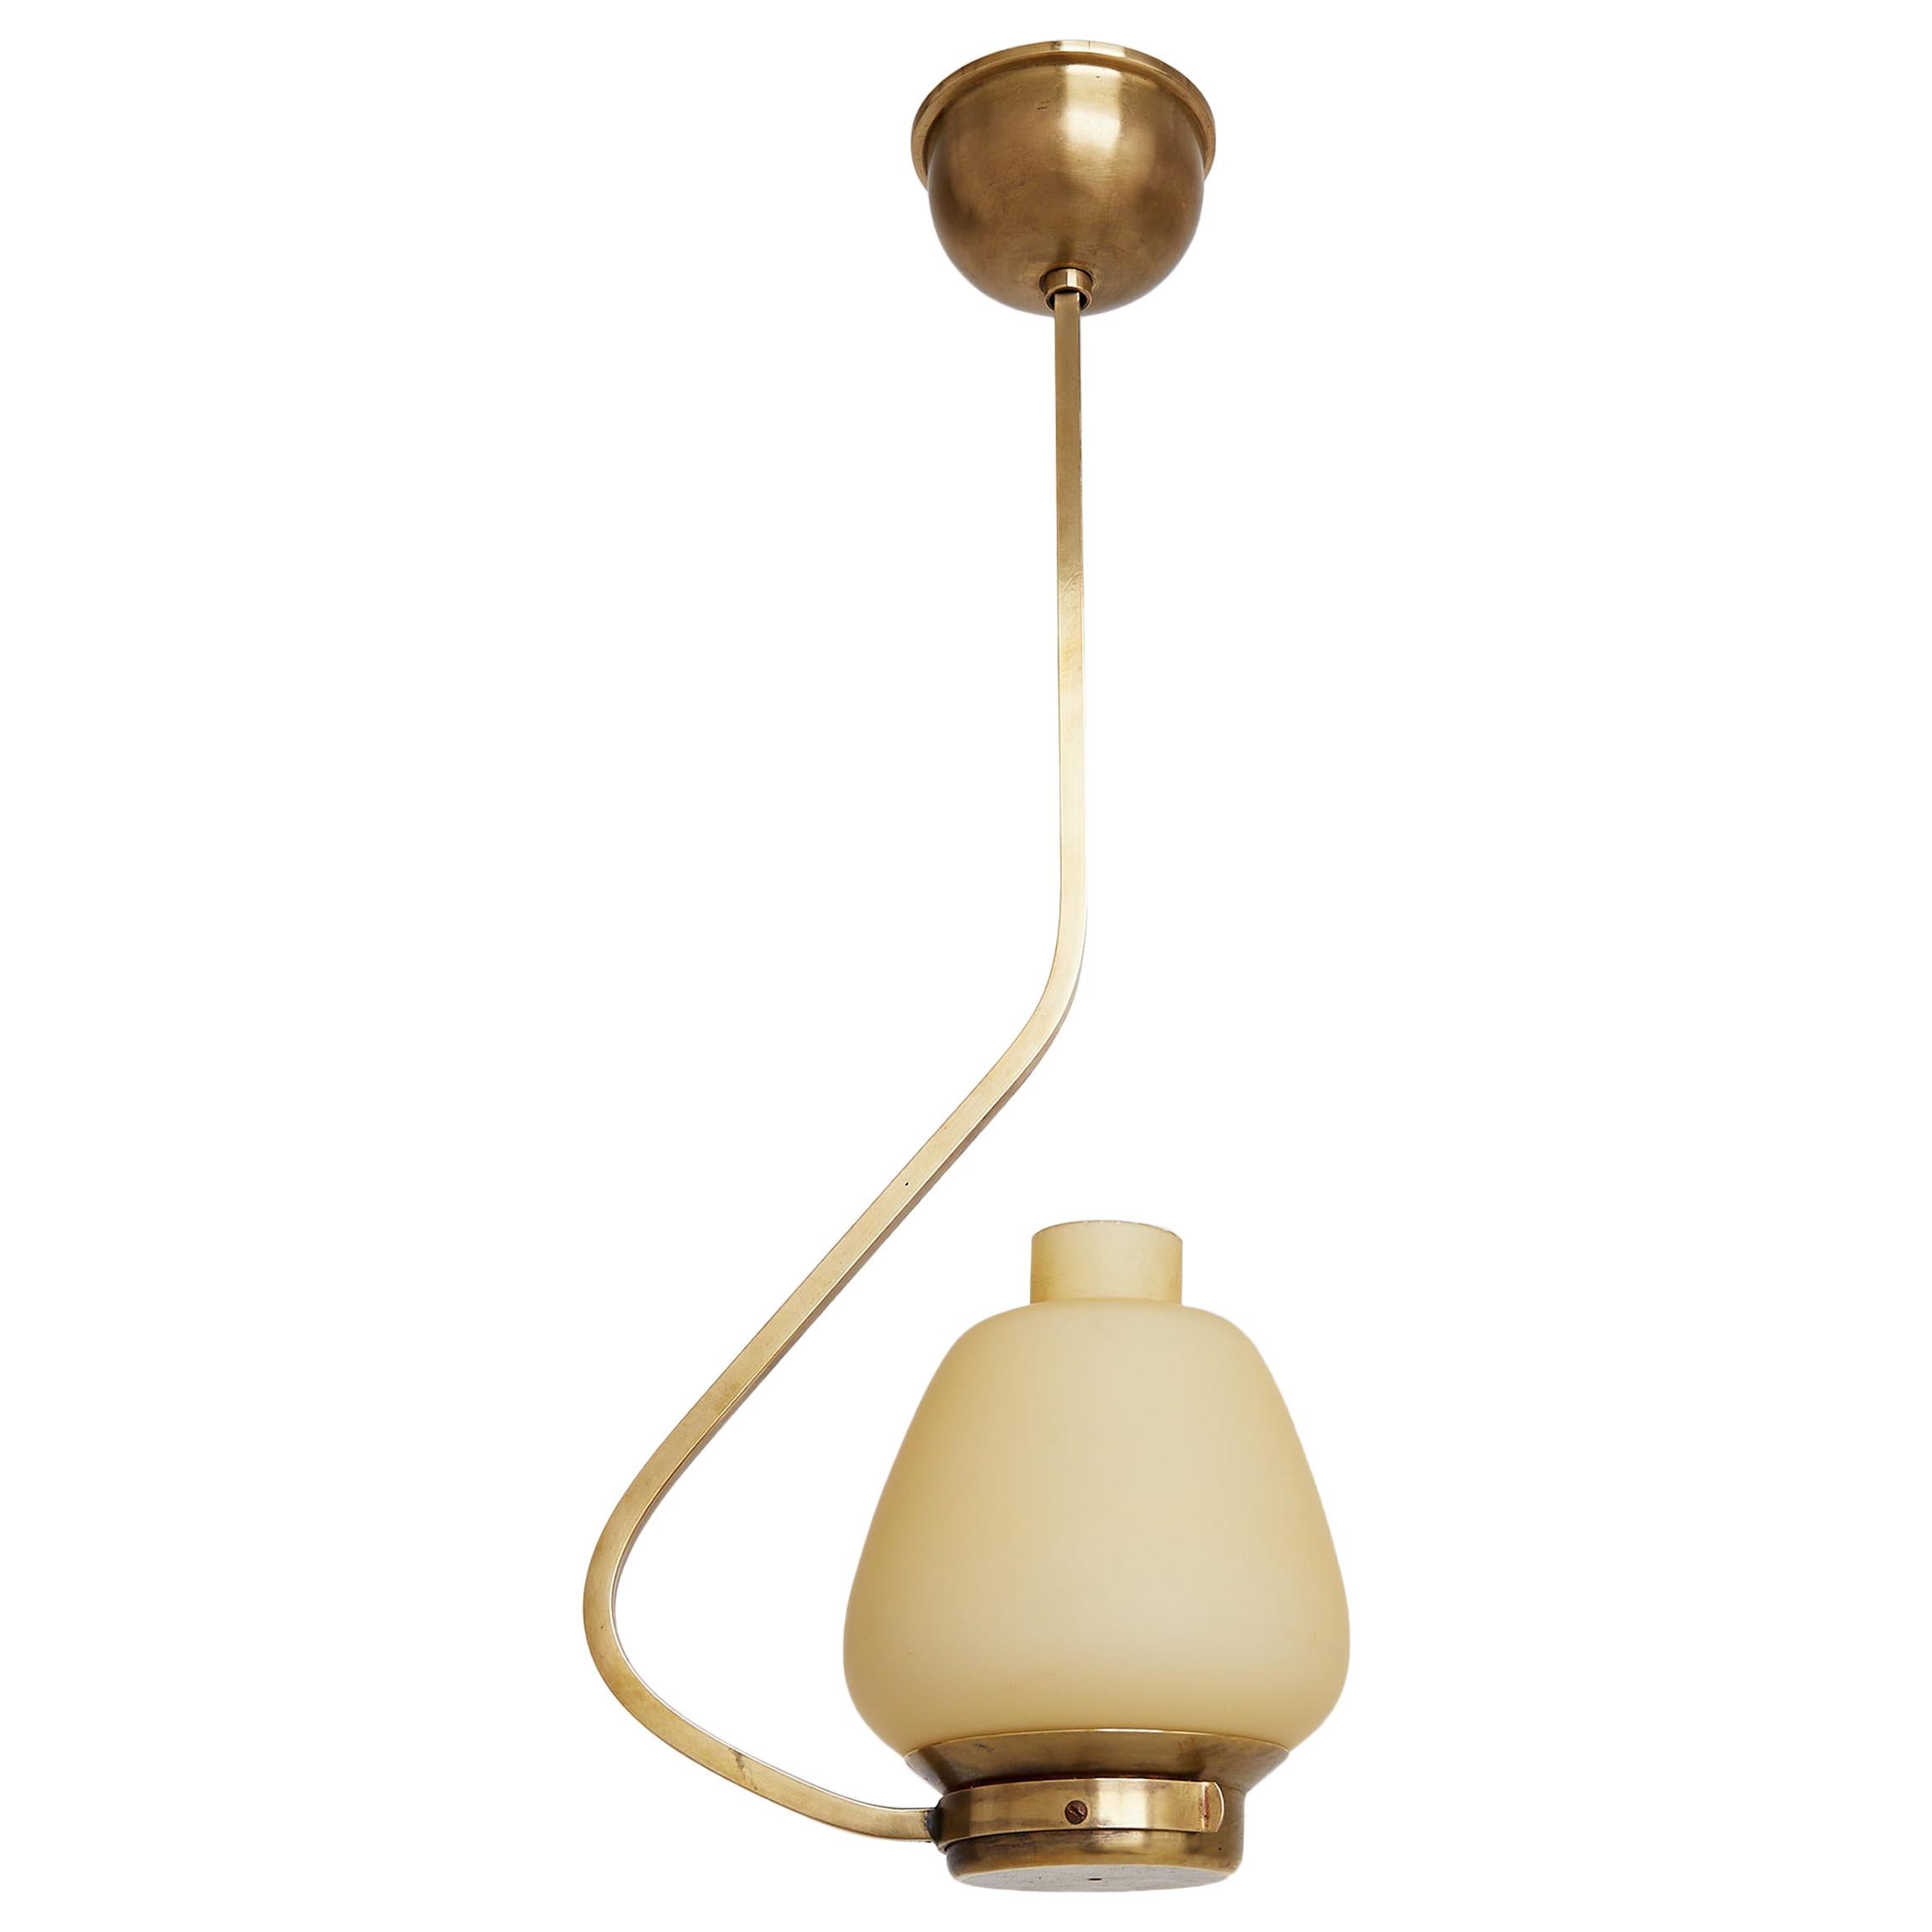 Midcentury Brass and Glass Ceiling Light